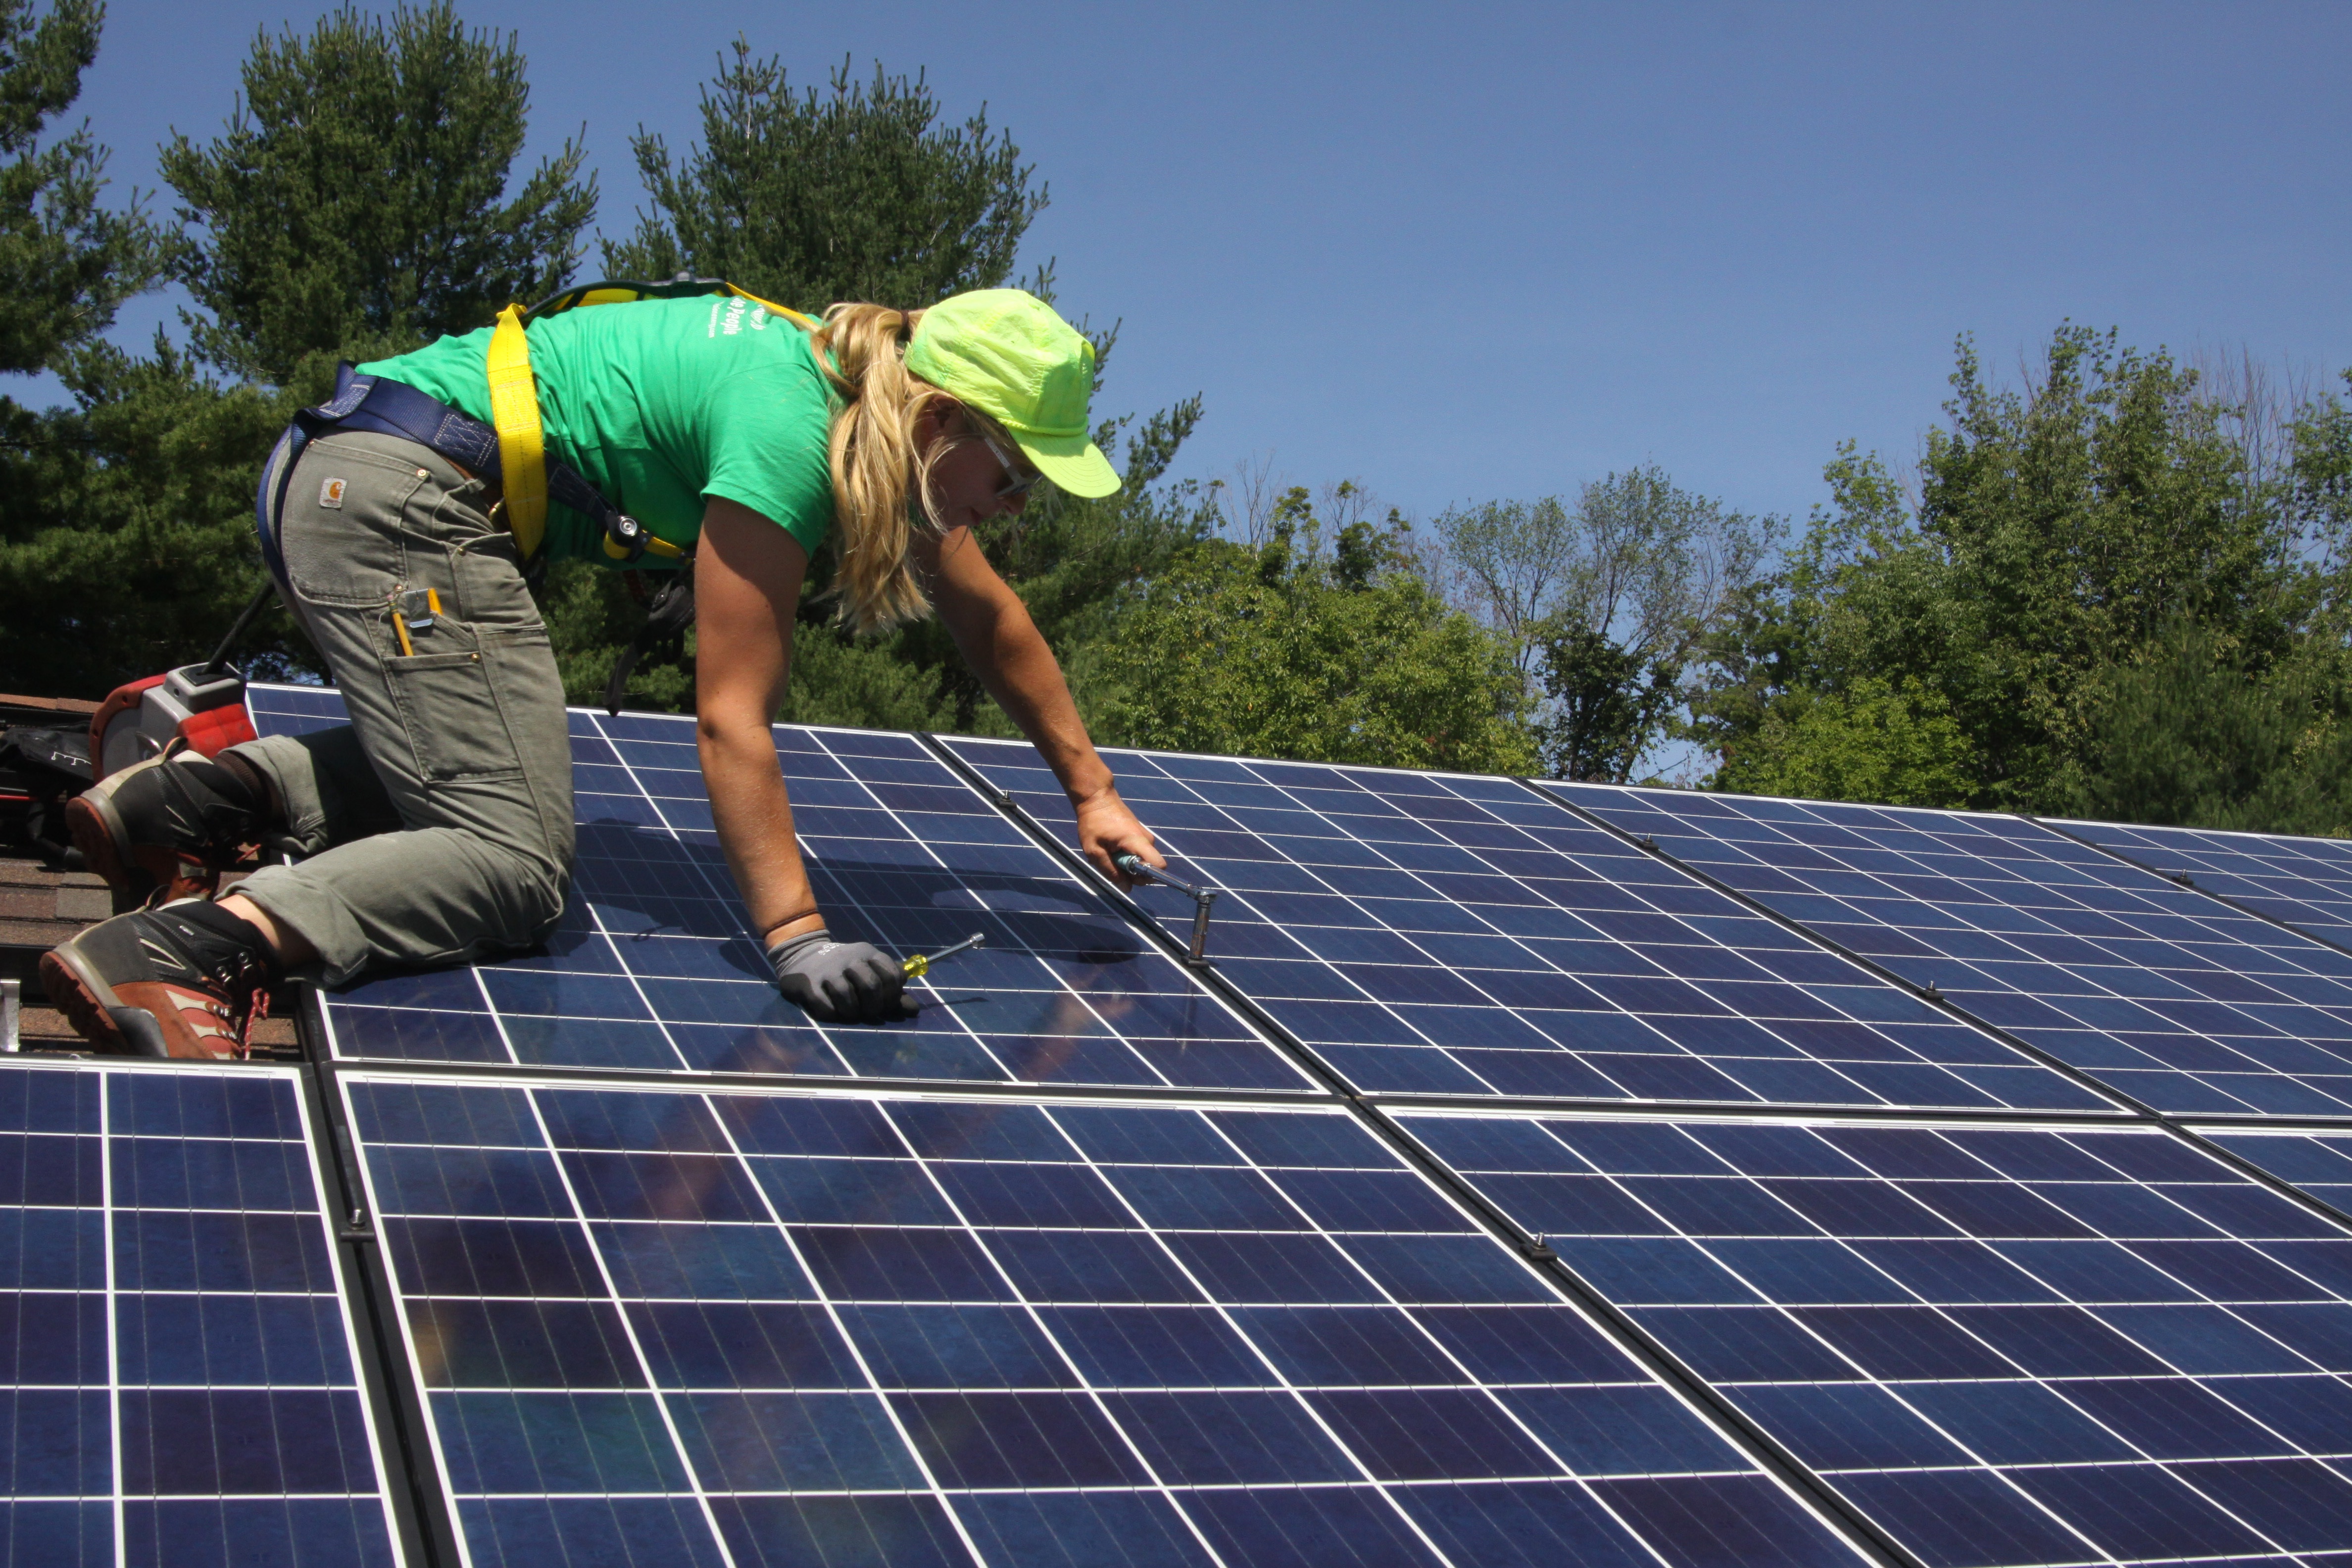 A woman kneels to install solar panels on a roof.